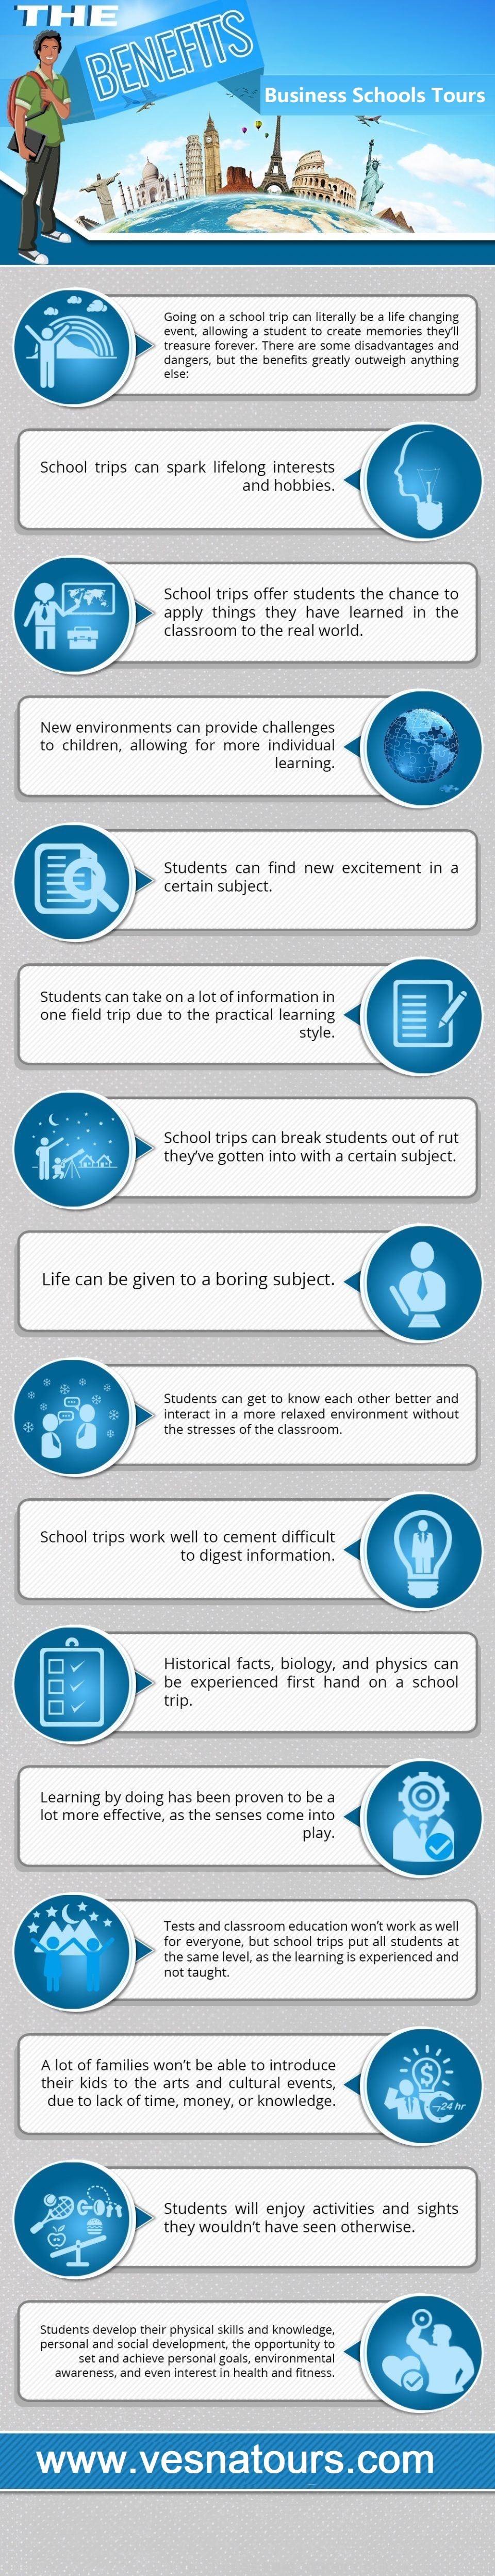 The Benefits of Business Schools Tours